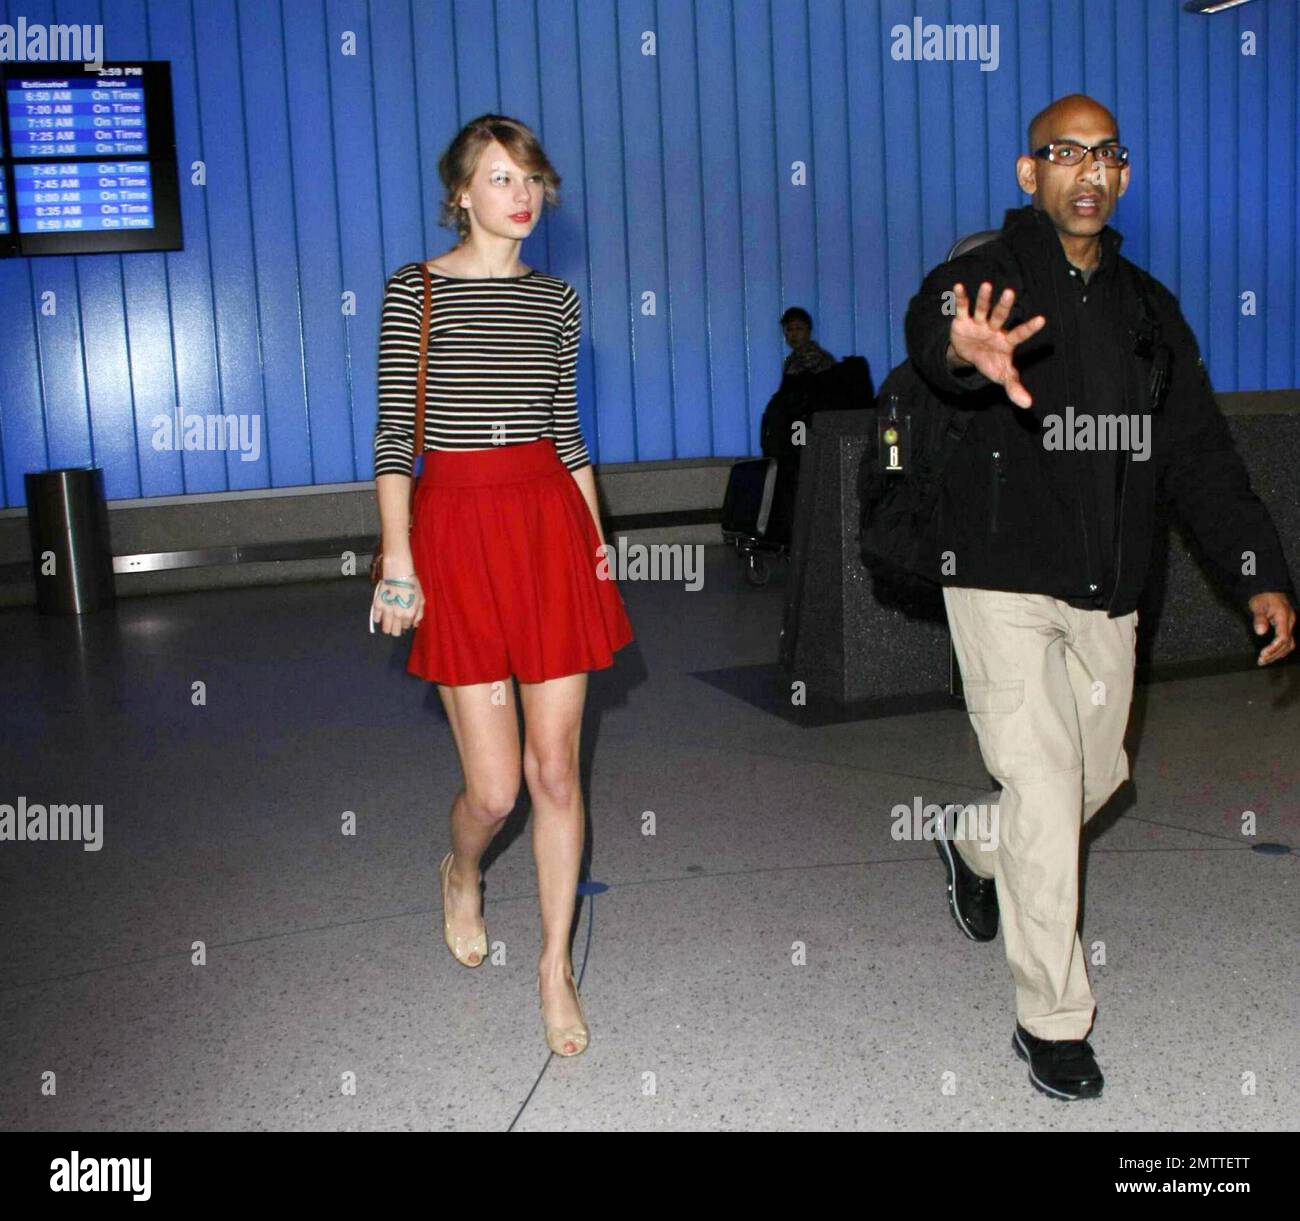 Pop country singer Taylor Swift arrives at LAX after flying in from Hong  Kong where she wrapped up the Asian portion of her Speak Now tour. Swift,  who looked fresh and fabulous